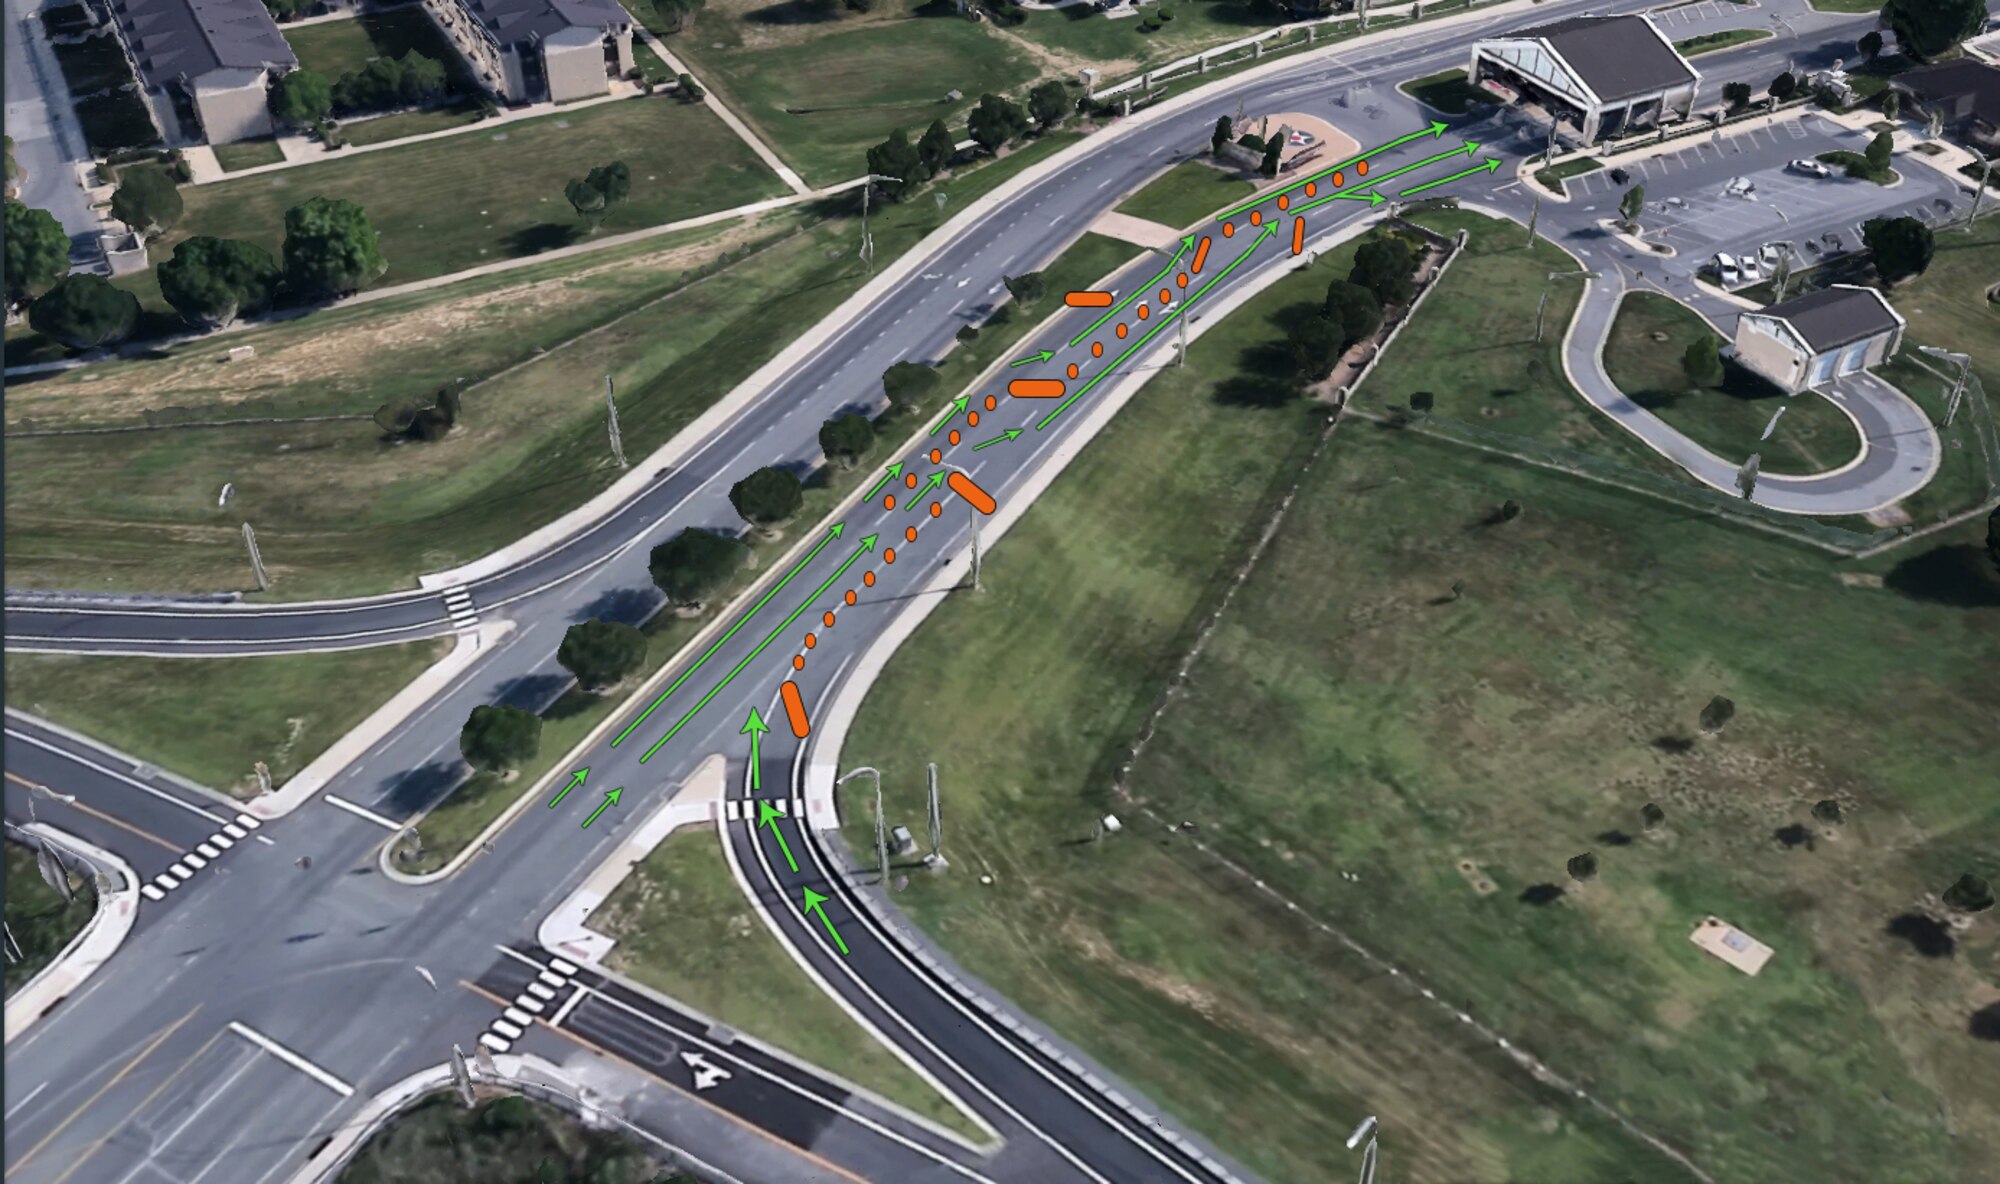 This illustration depicts the new traffic pattern at the main gate of Dover Air Force Base, Del. The new serpentine route was established Sept. 28, 2018, to slow traffic and provide additional safety to 436th Security Forces Squadron defenders. (U.S. Air Force photo illustration by Airman 1st Class Jonathan W. Harding)